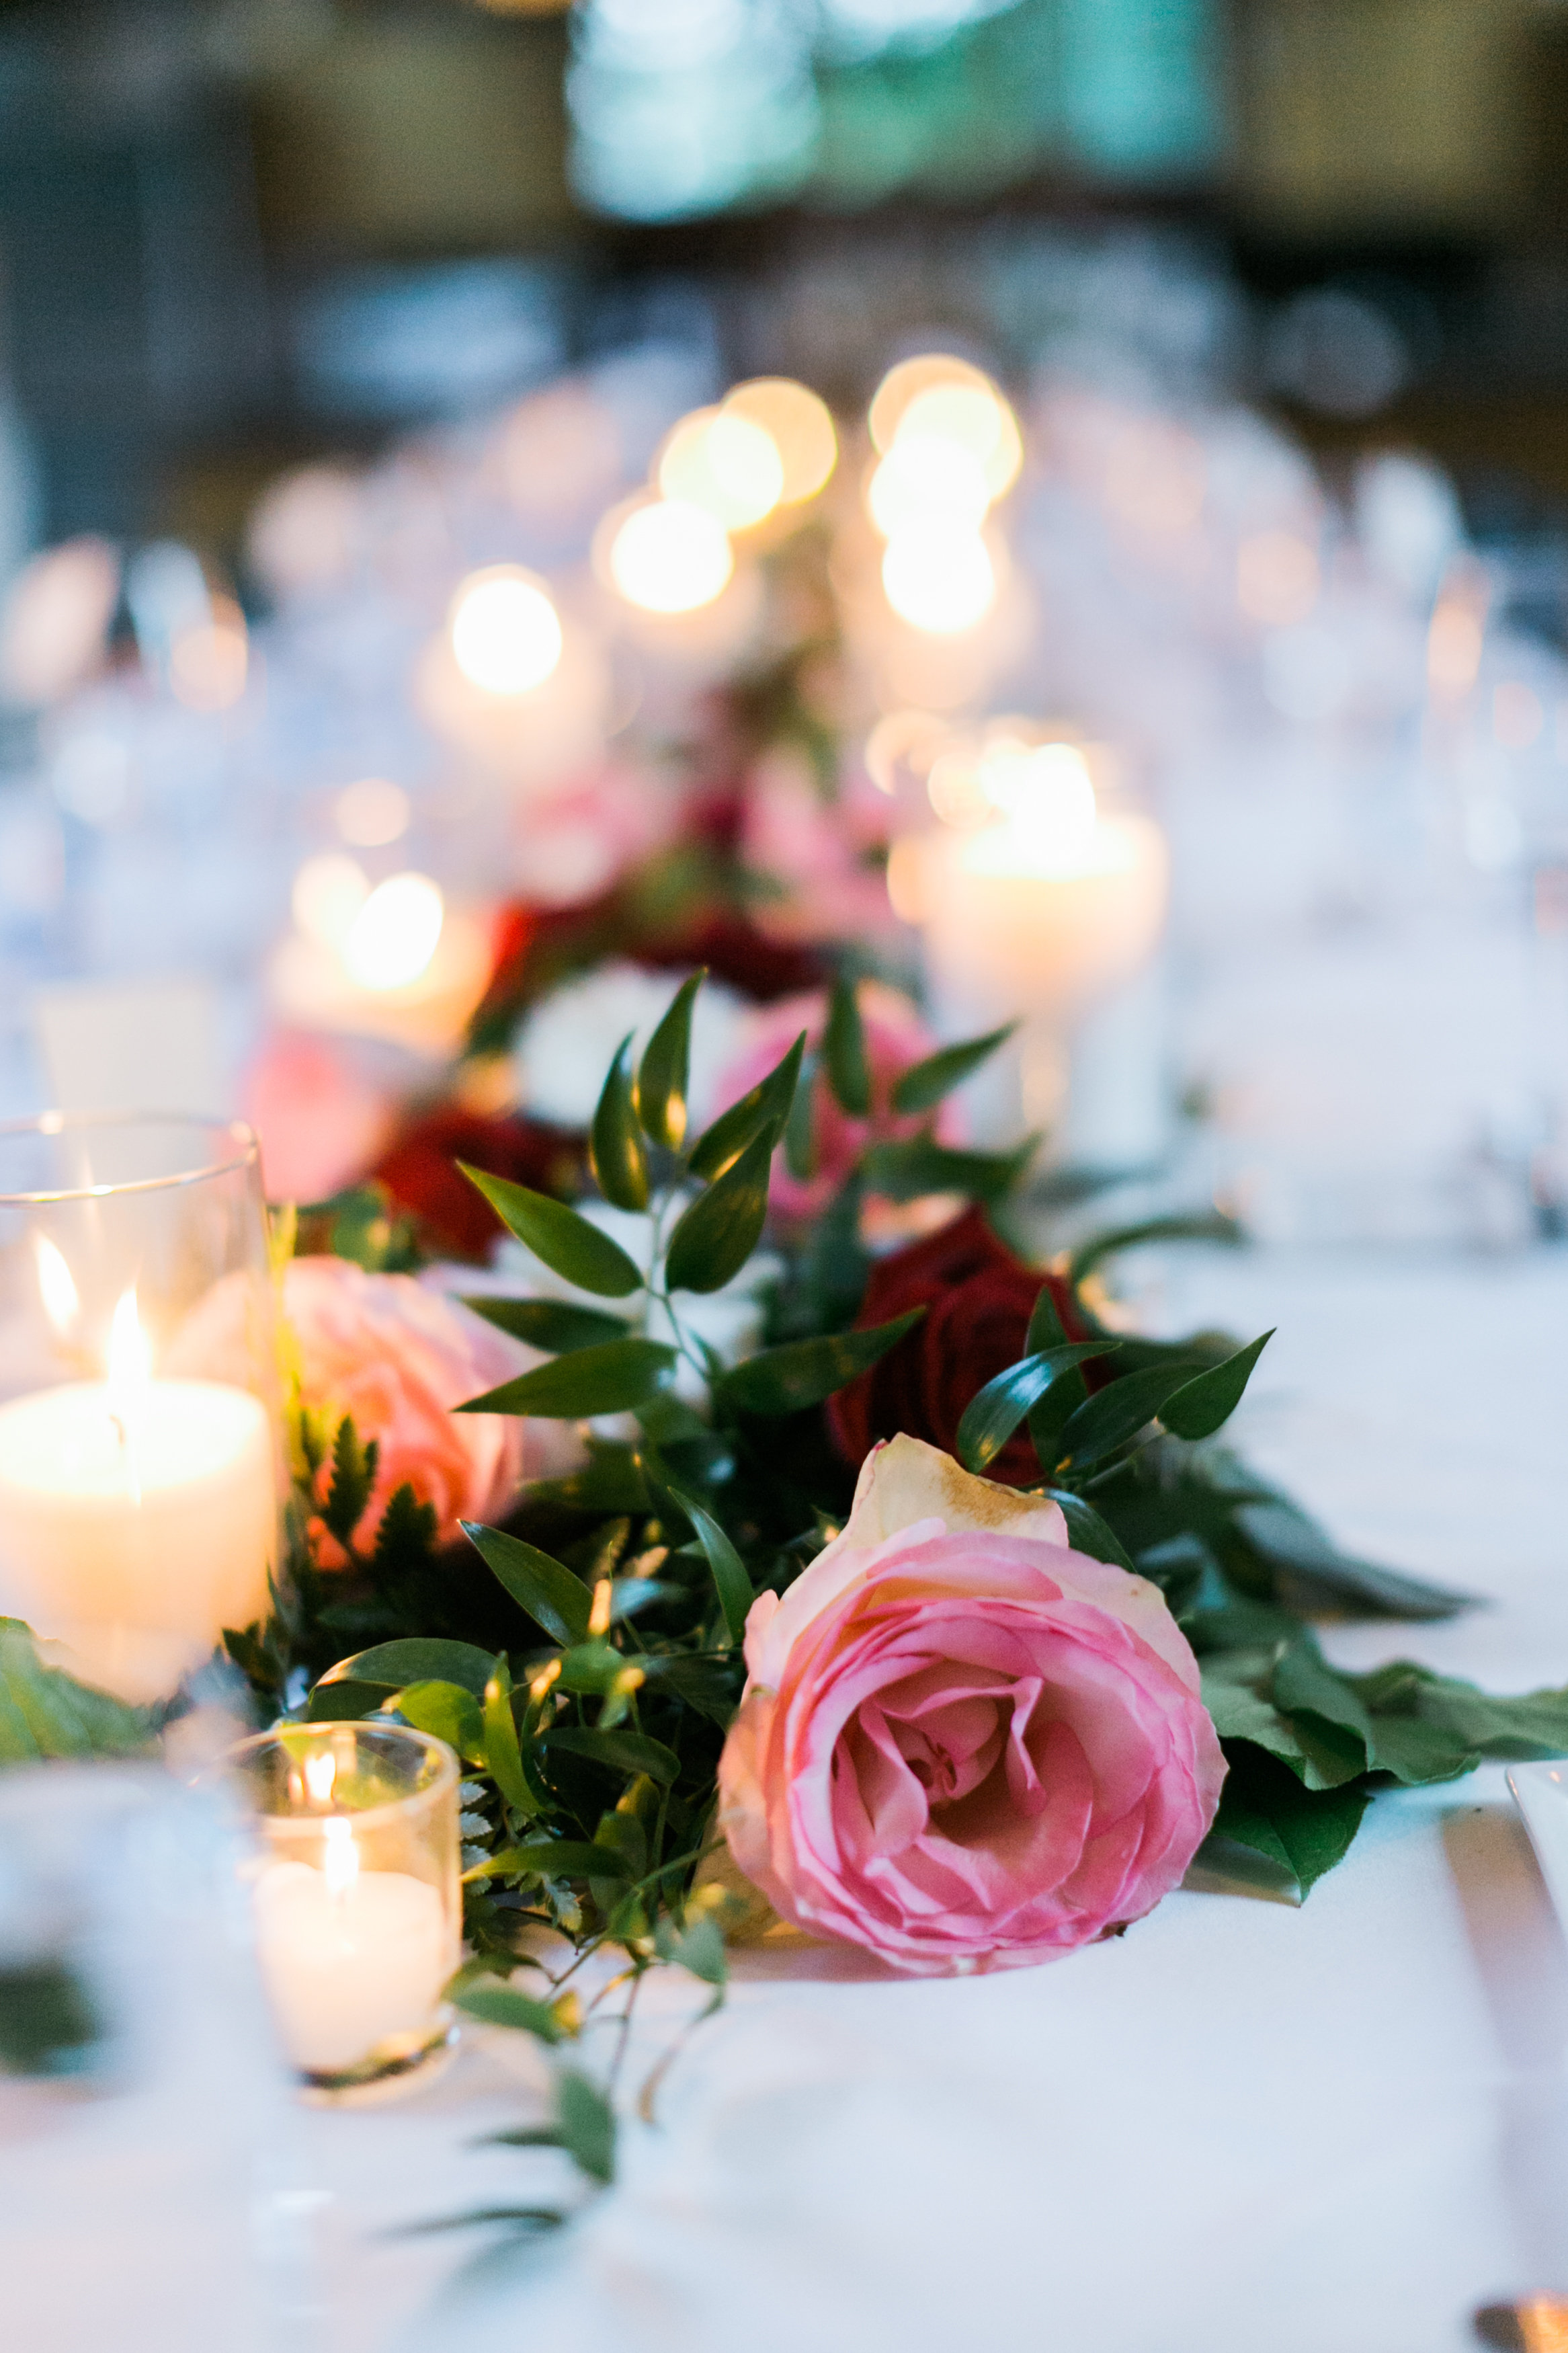 Centerpiece with Pink Roses and Greenery